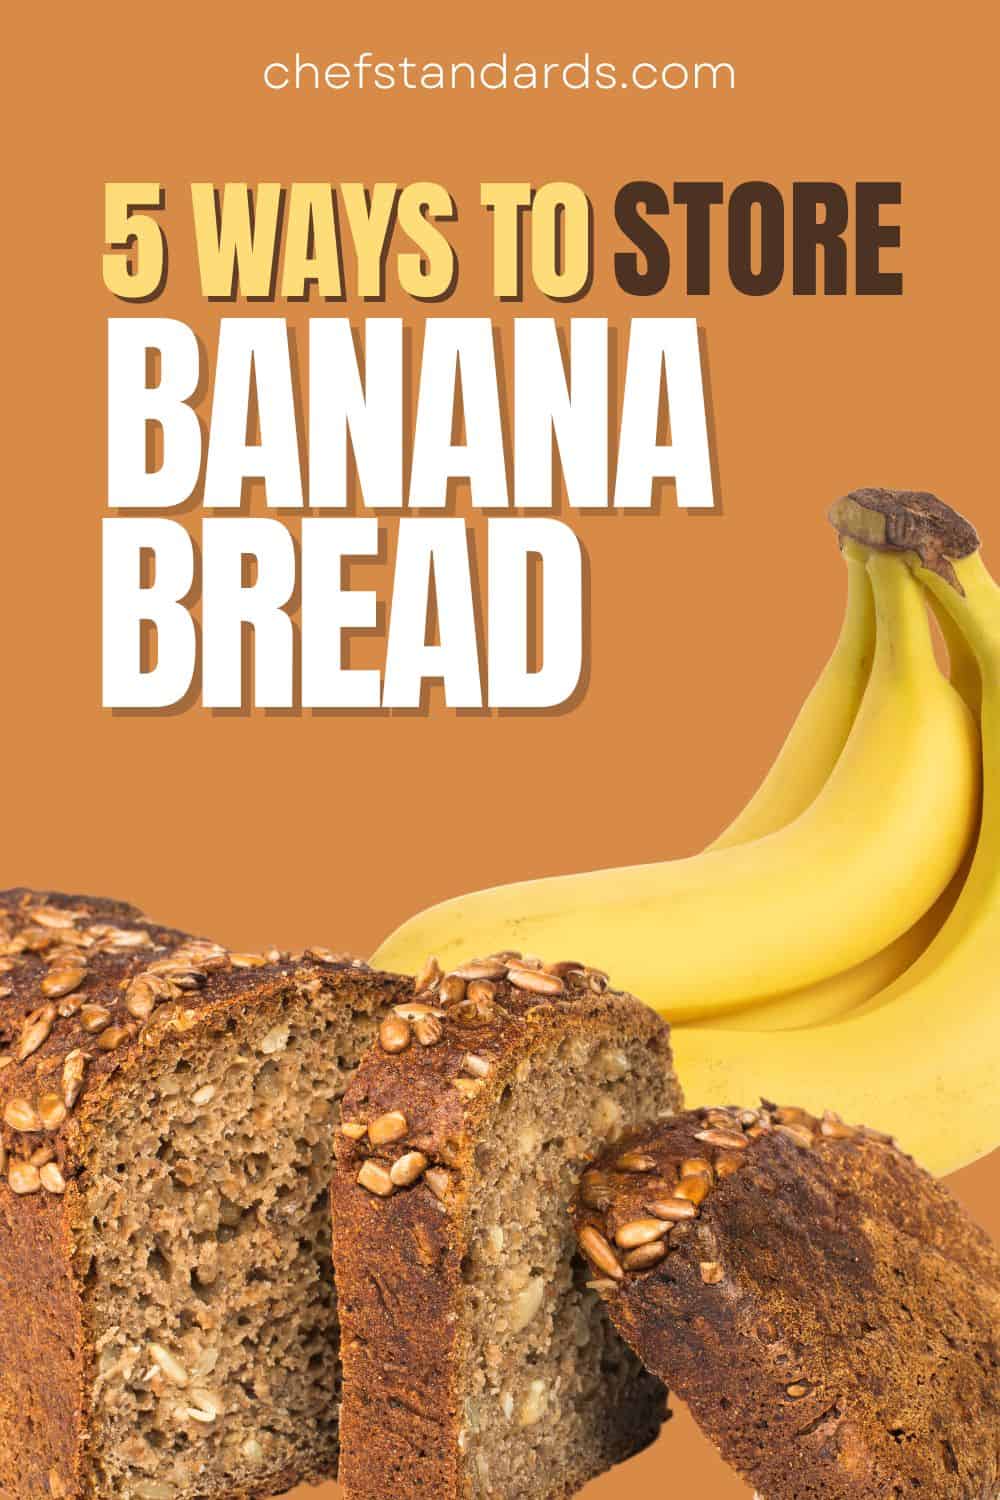 5 Simple & Effective Ways On How To Store Banana Bread
